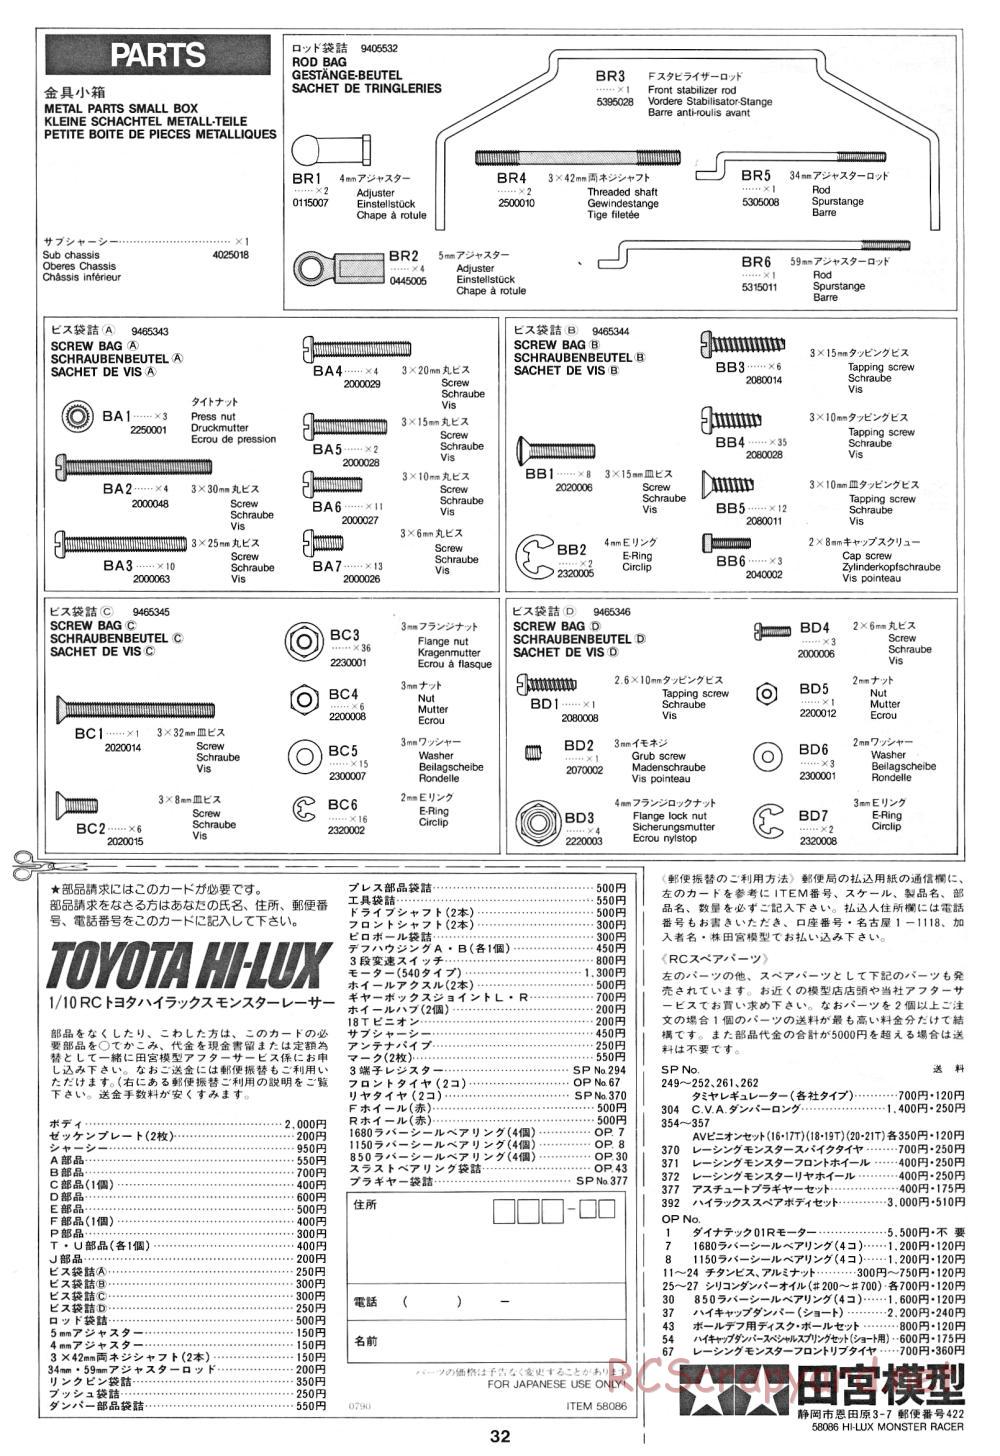 Tamiya - Toyota Hilux Monster Racer - 58086 - Manual - Page 32